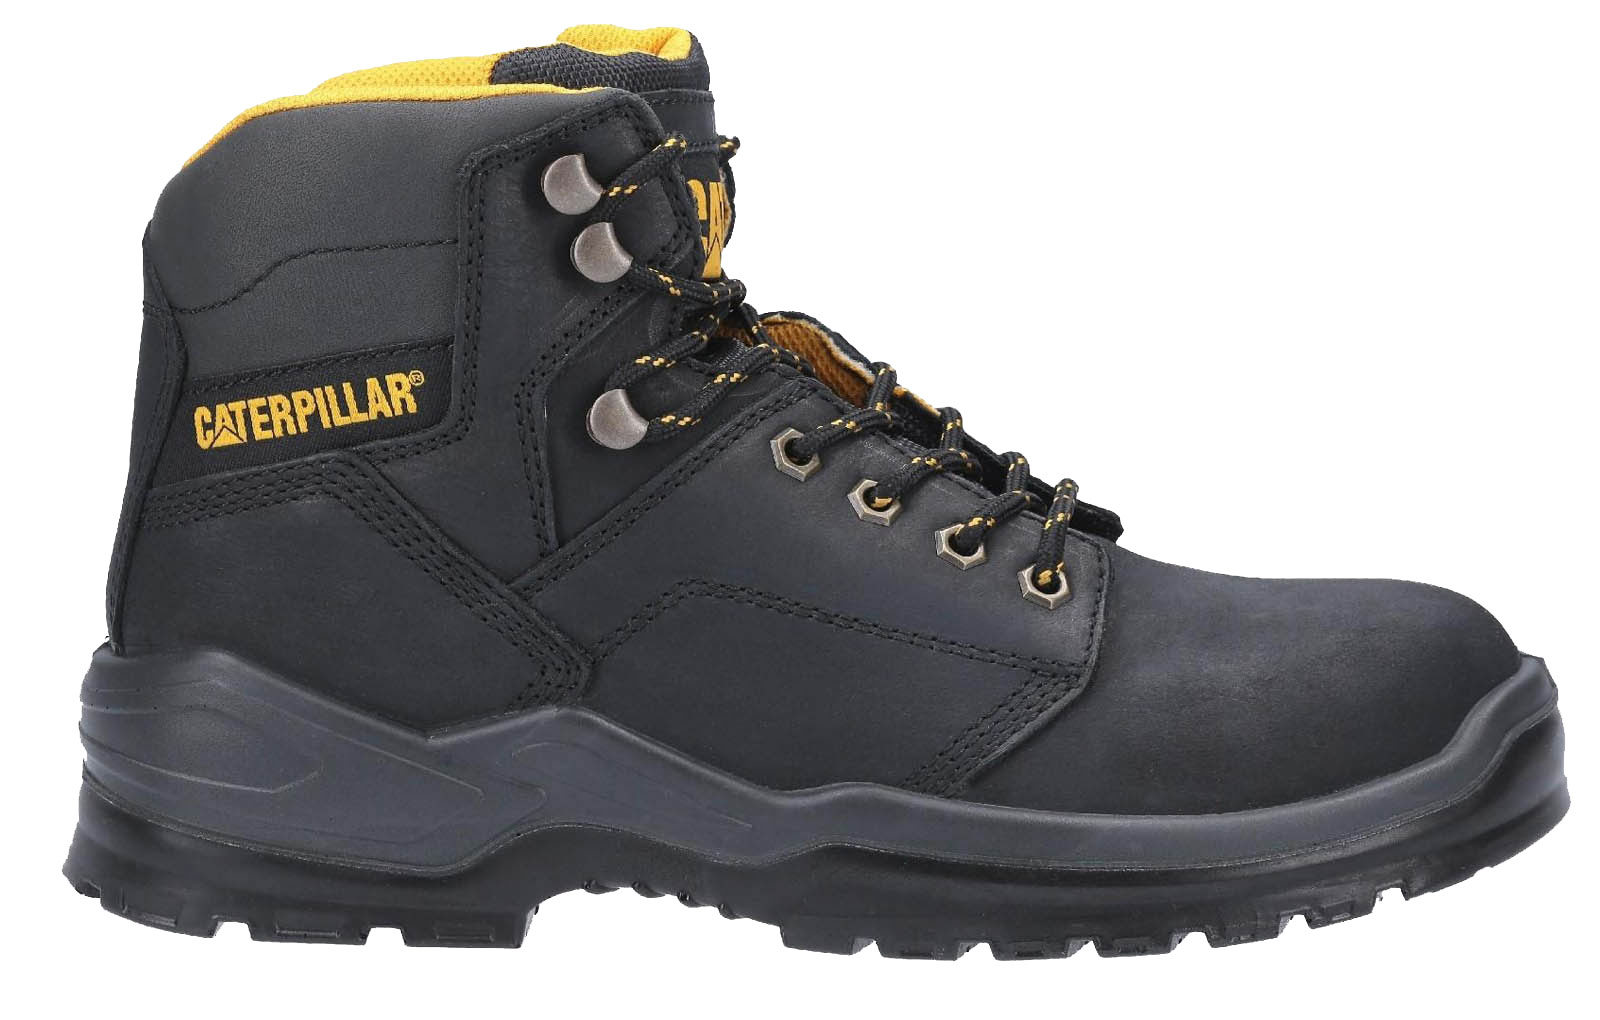 Caterpillar Striver S3 Safety Boots Mens - GRD-30702-52446-03